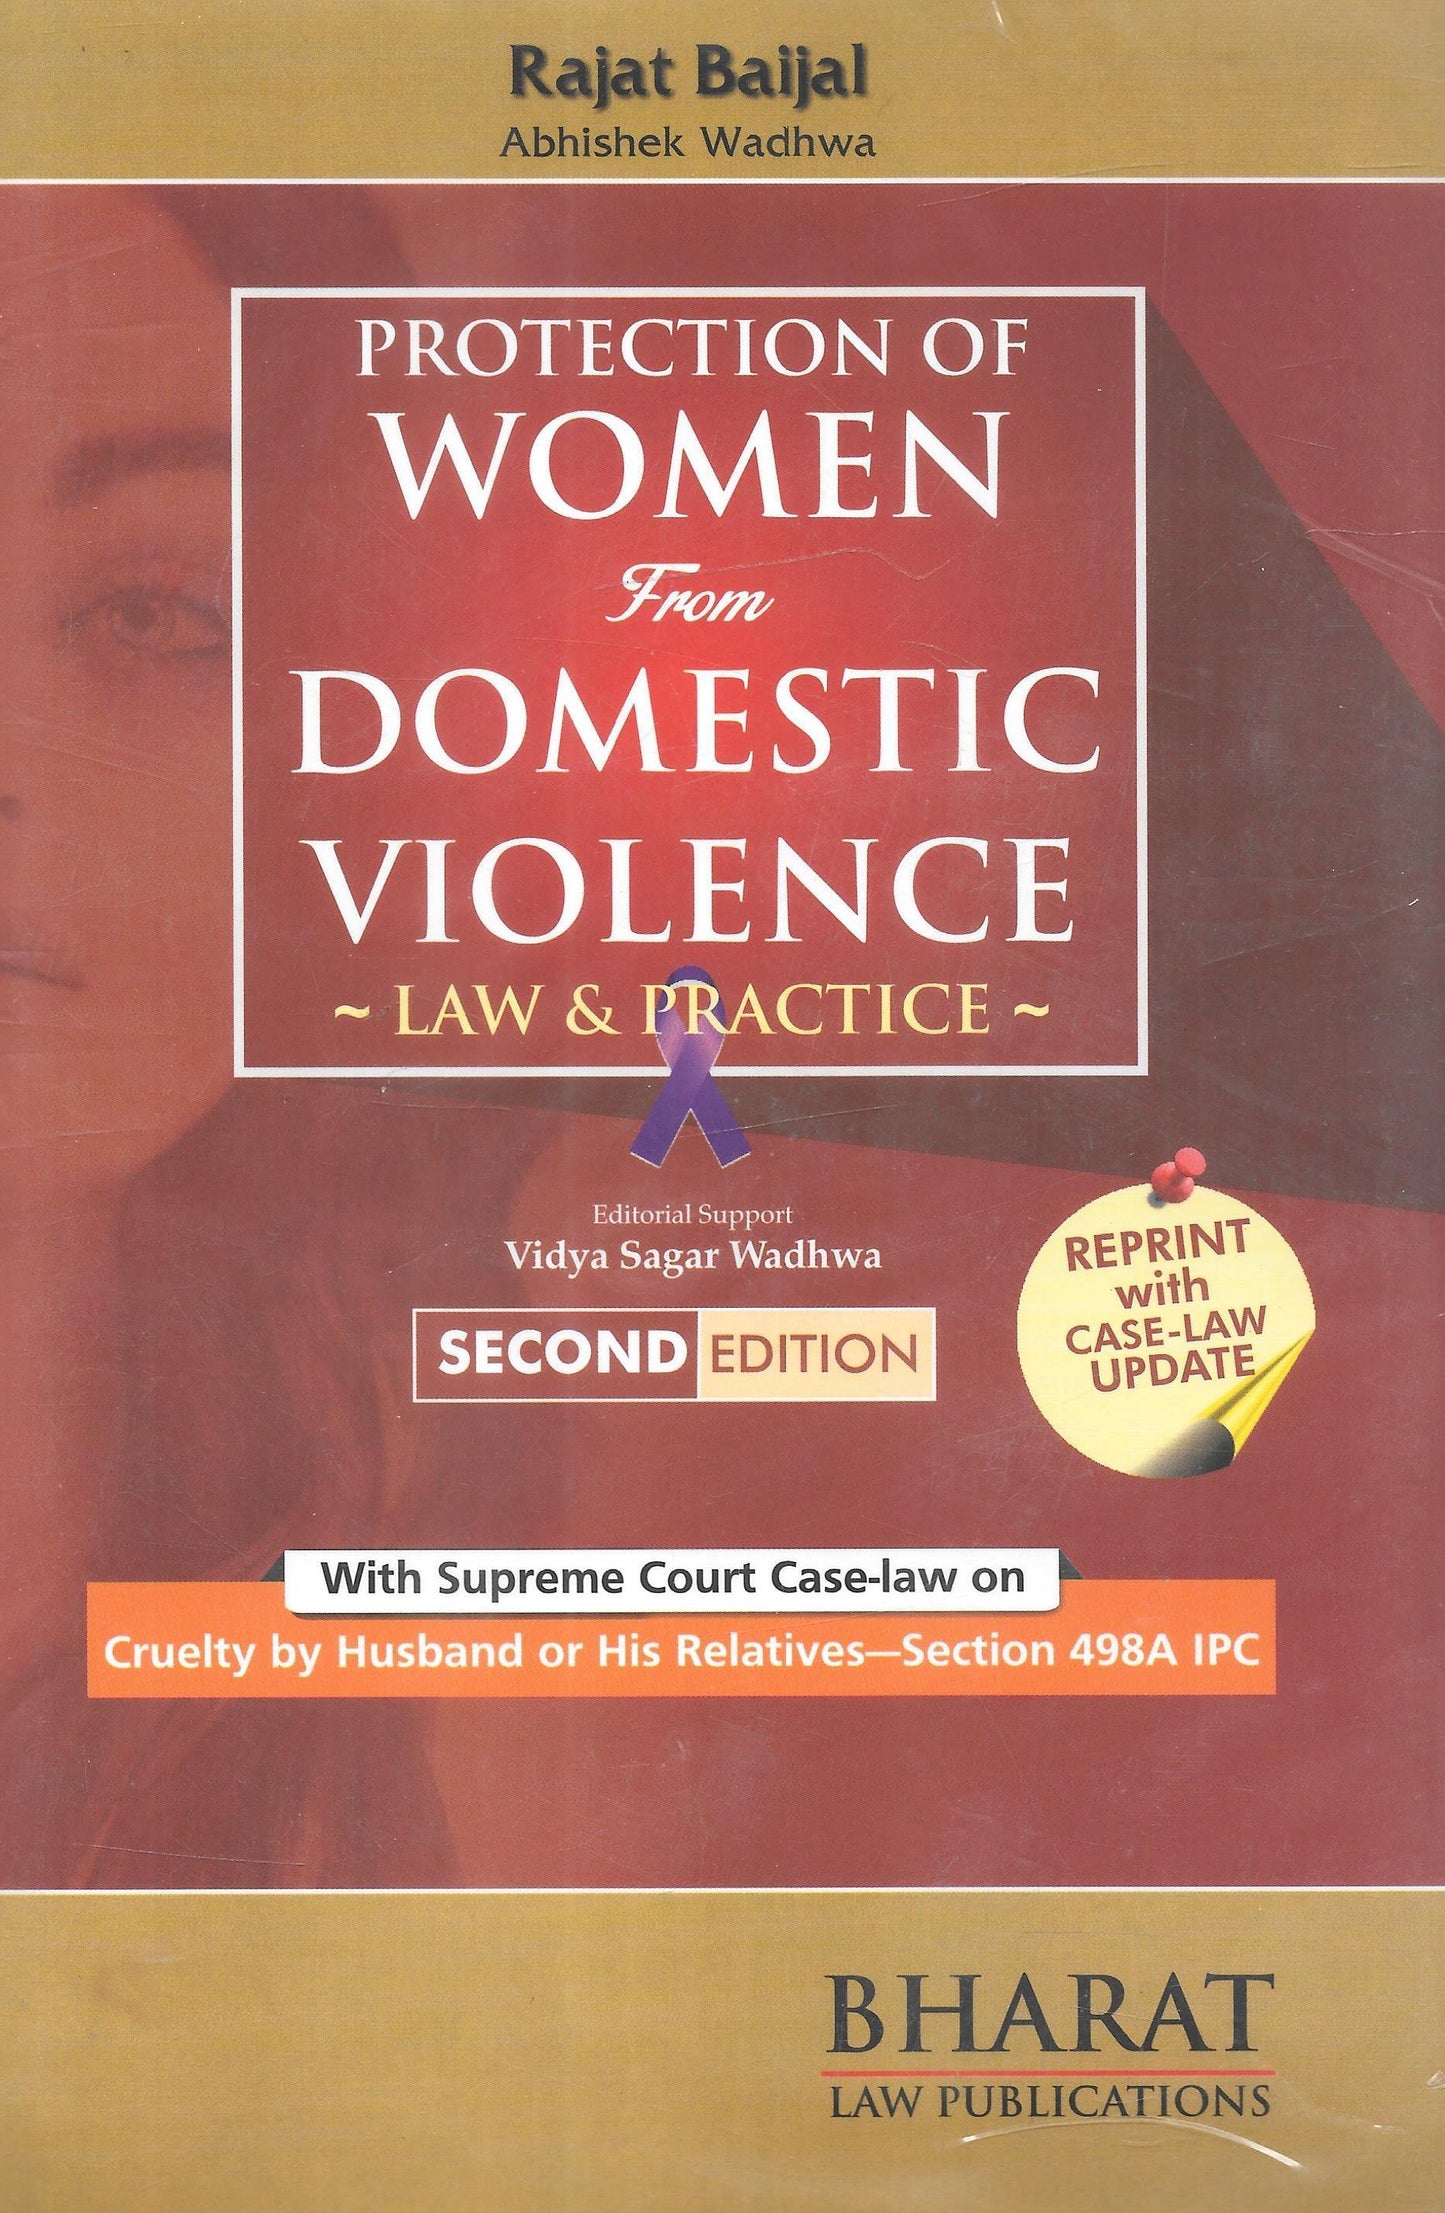 Protection of Women from Domestic Violence Law and Practice